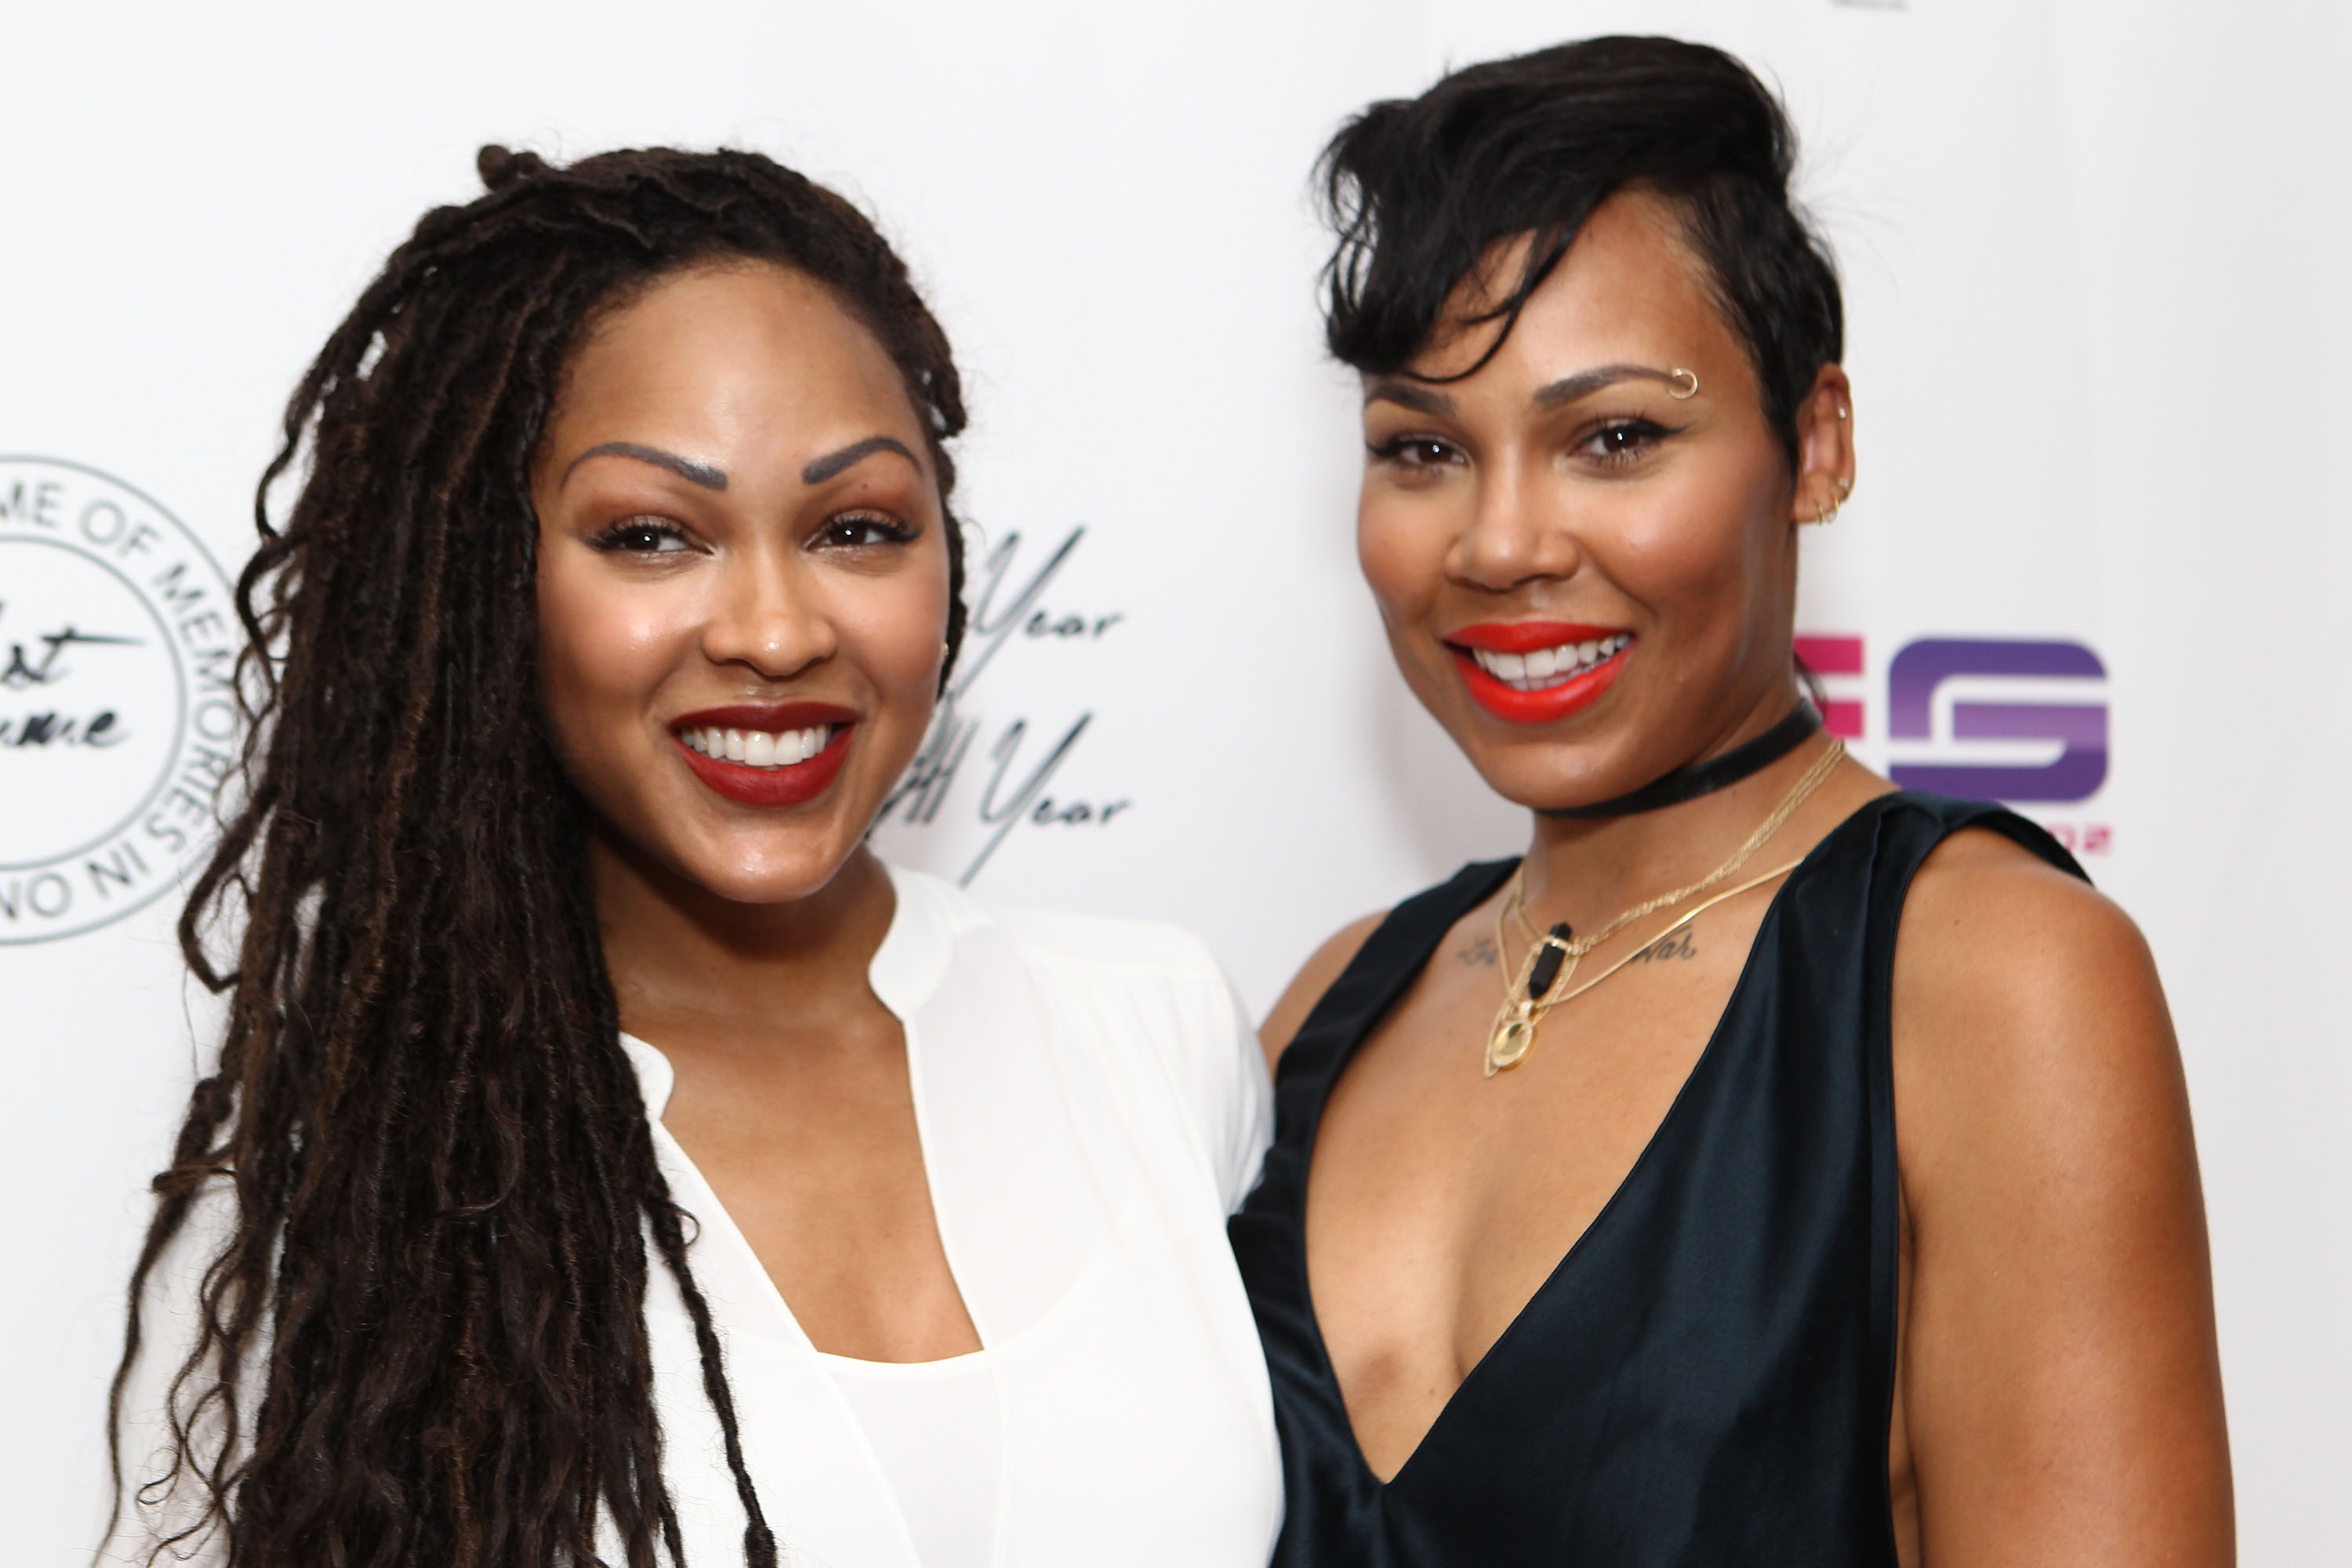 Meagan Good and La'Myia Good at the La'Myia Good Hosts 1st Femme Fragrance Launch, on February 11, 2016, in Hollywood, California. | Source: Getty Images